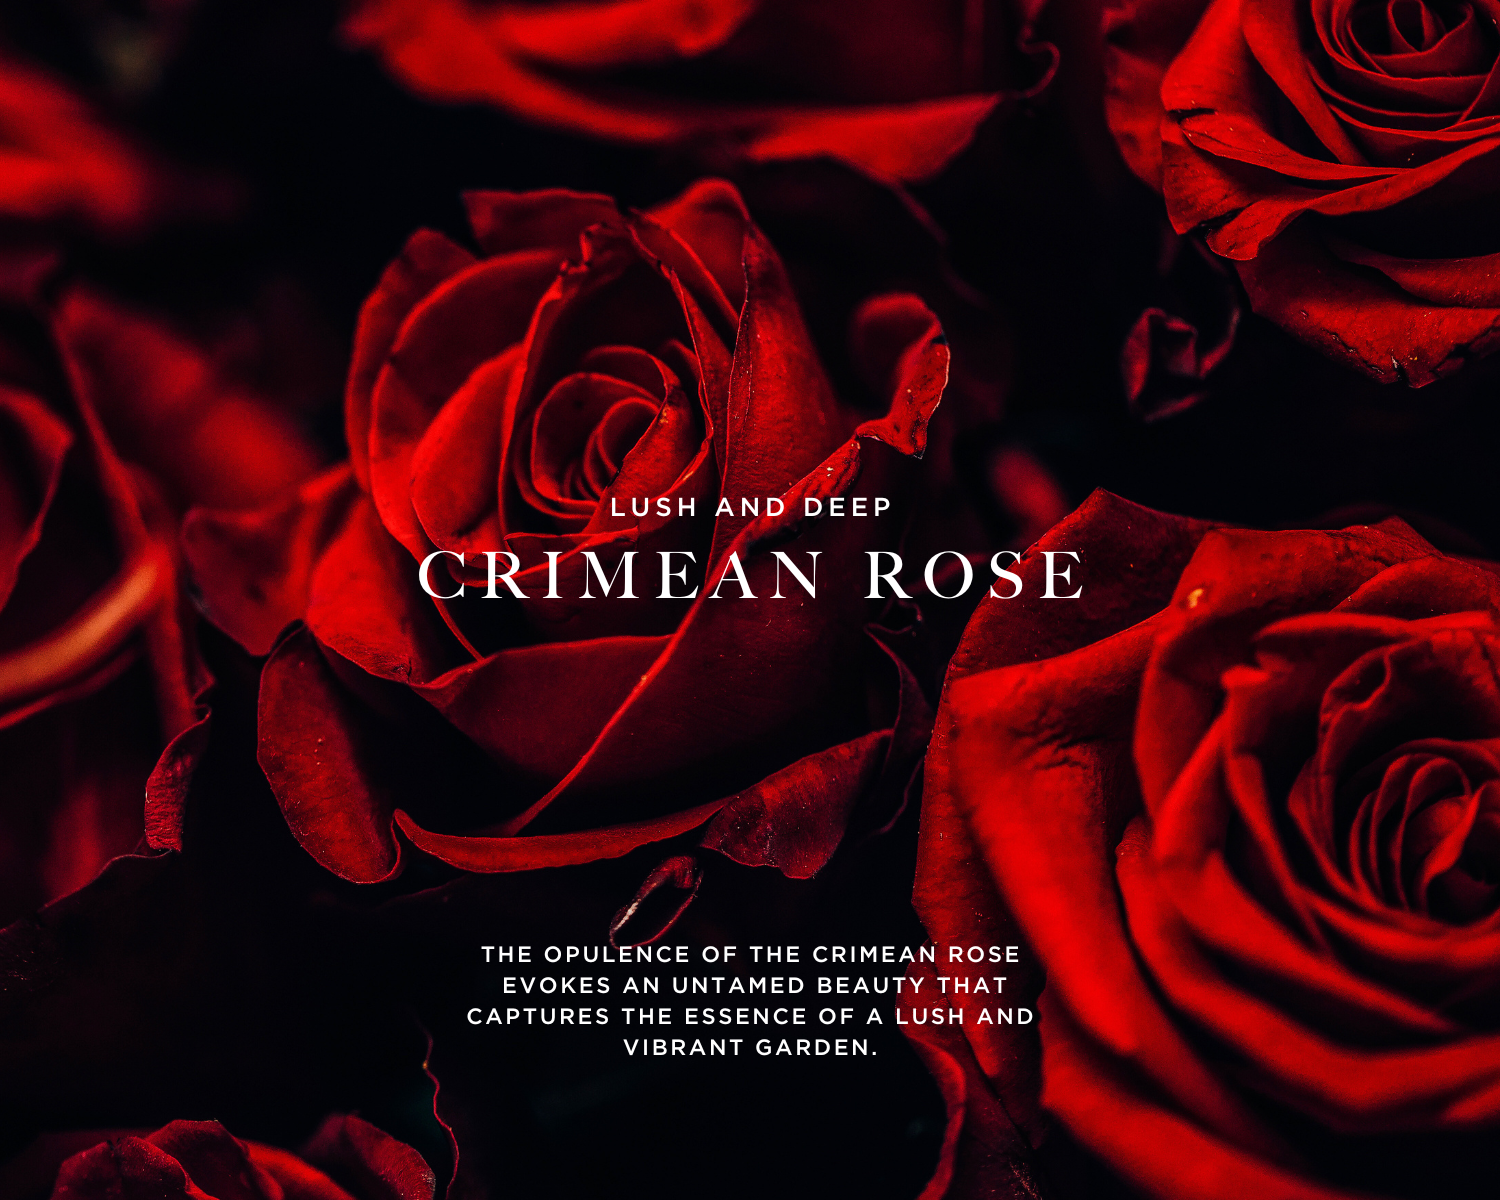 Caswell-Massey Marem Perfume for Women: "Lush and Deep Crimean Rose" image of deep red roses with dew